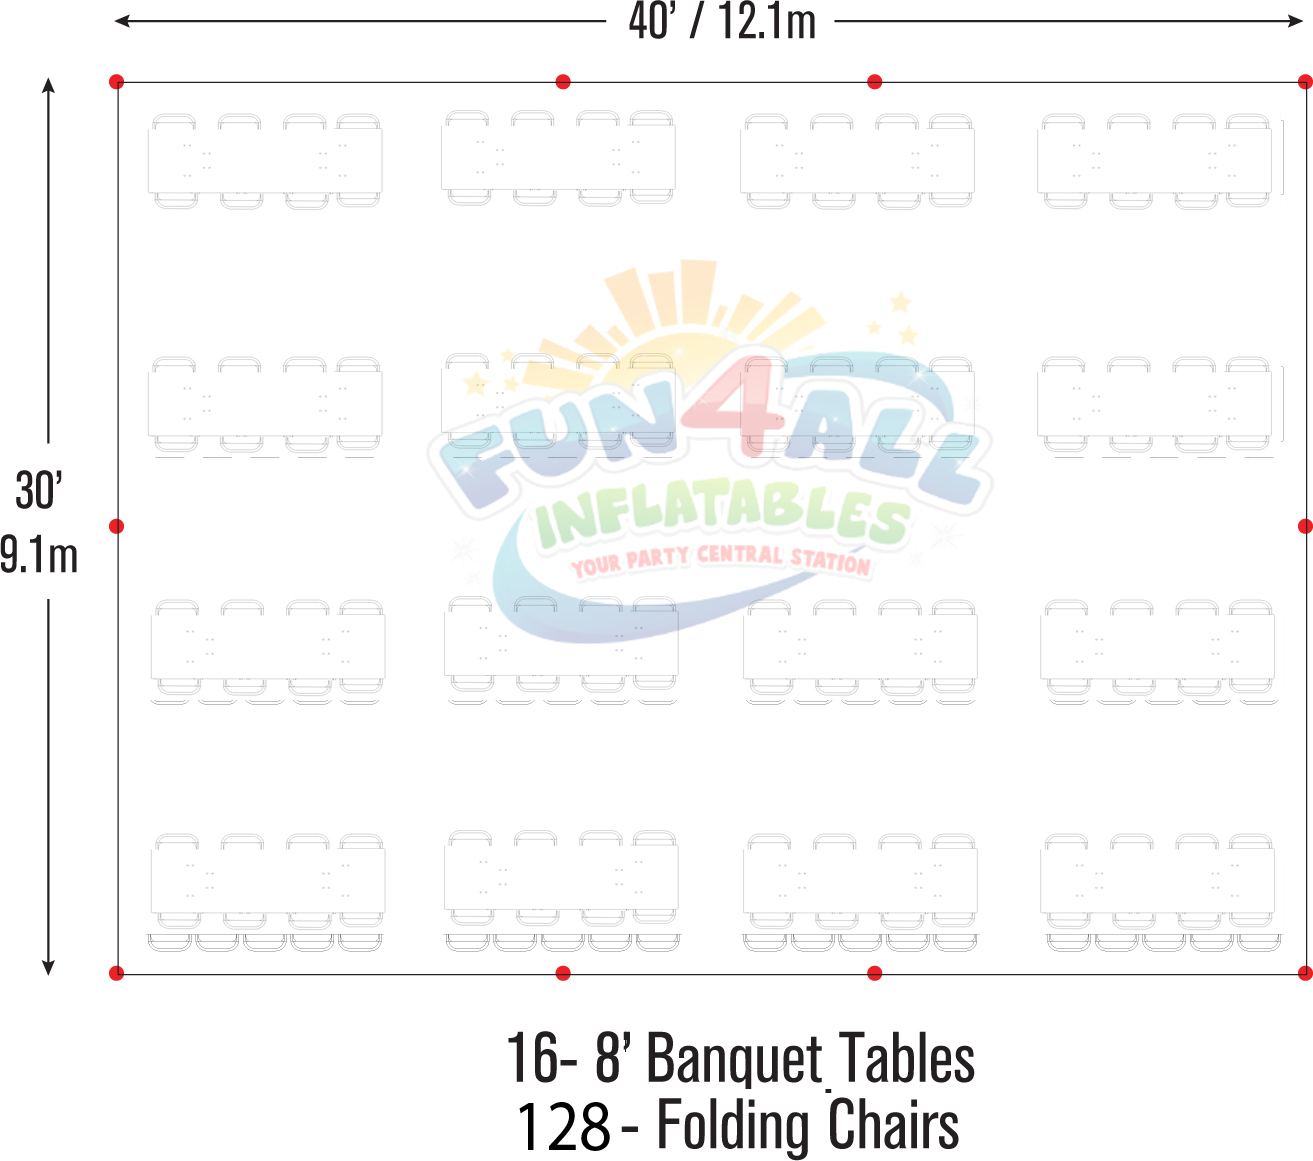 30x40 frame tent seating layout